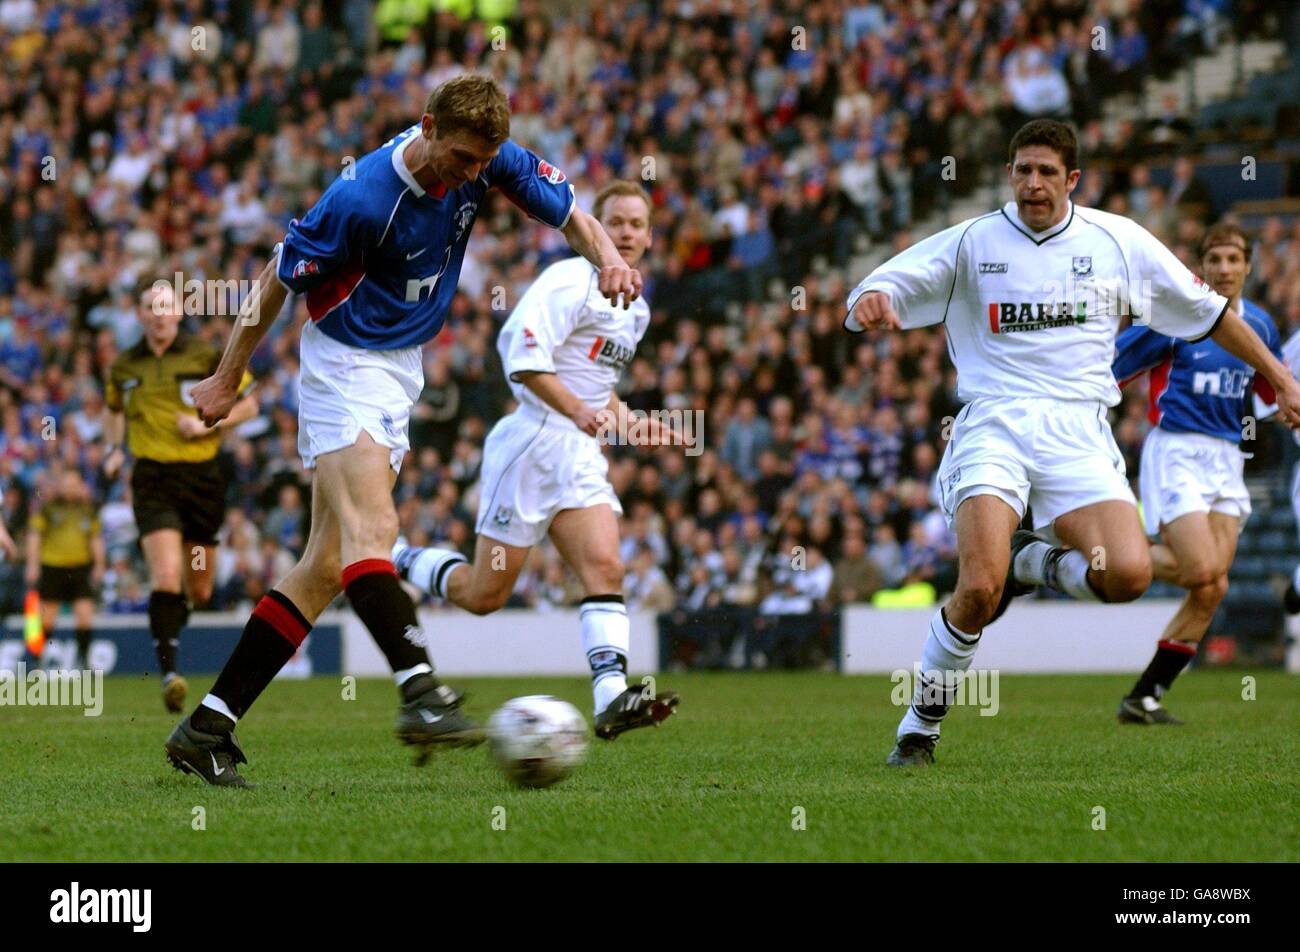 Scottish Soccer - CIS Insurance Cup - Final - Rangers v Ayr United. Rangers' Tore Andre Flo shoots to score the first goal Stock Photo